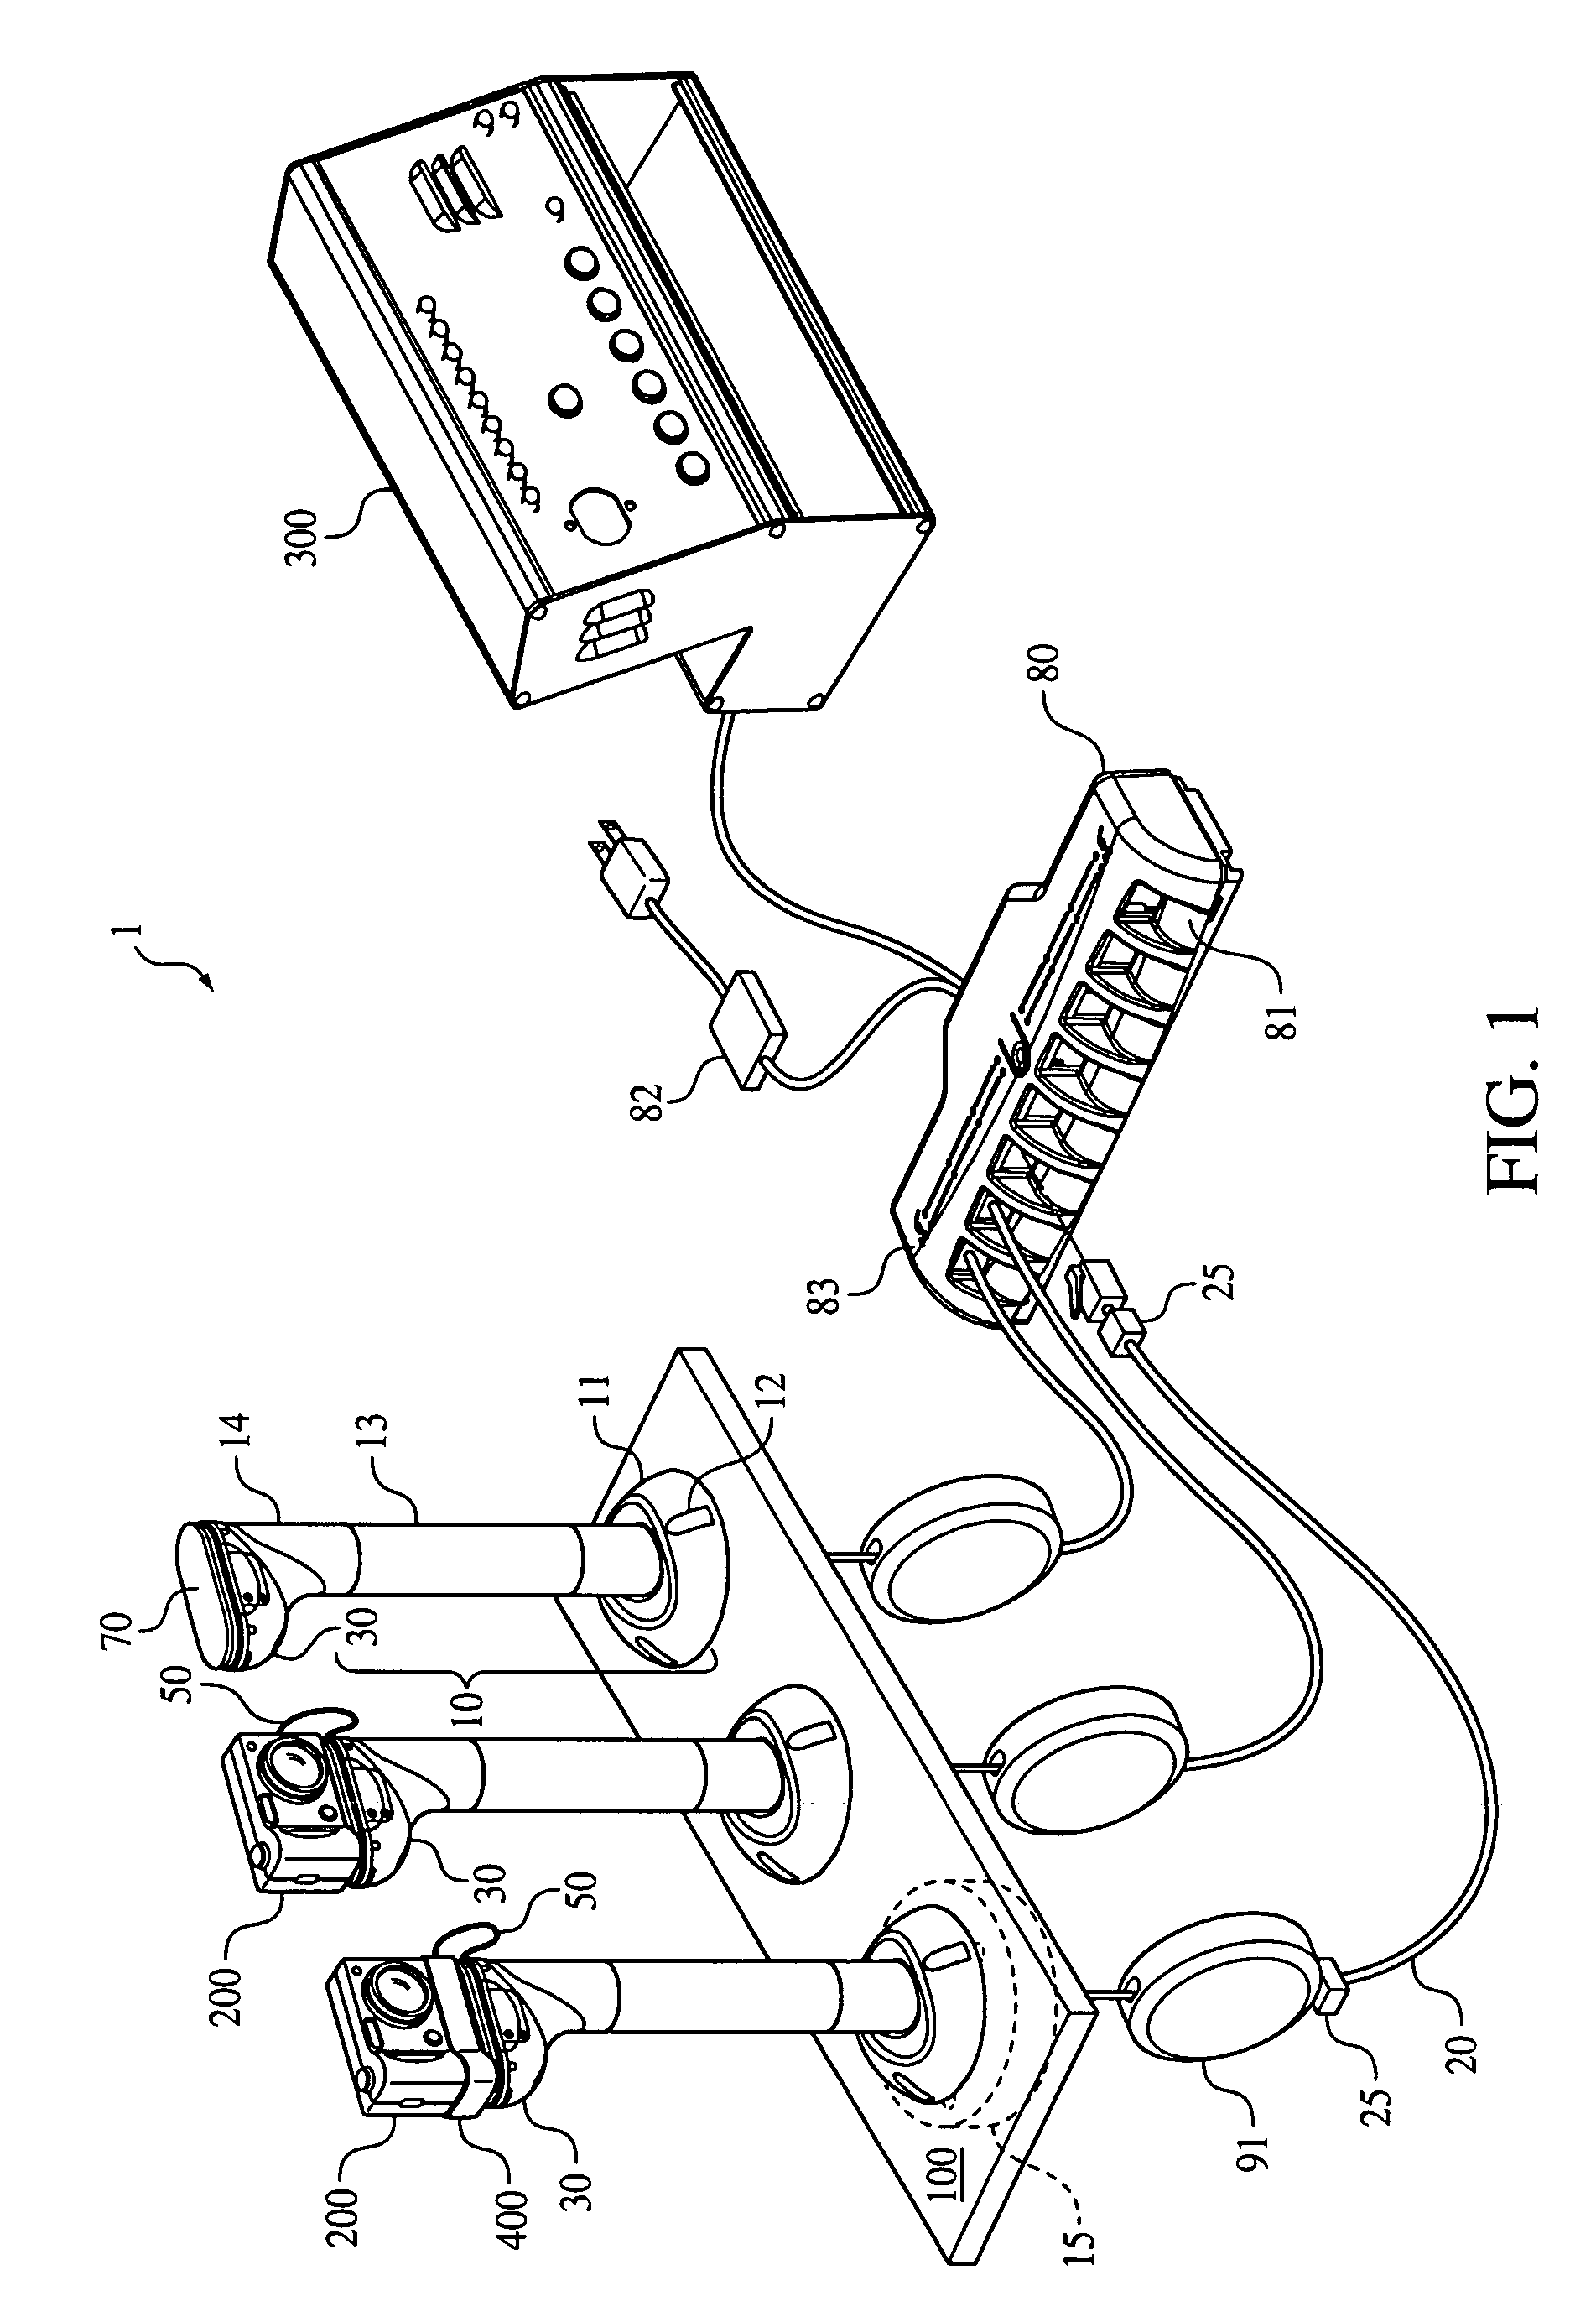 Security system for power and display of consumer electronic devices